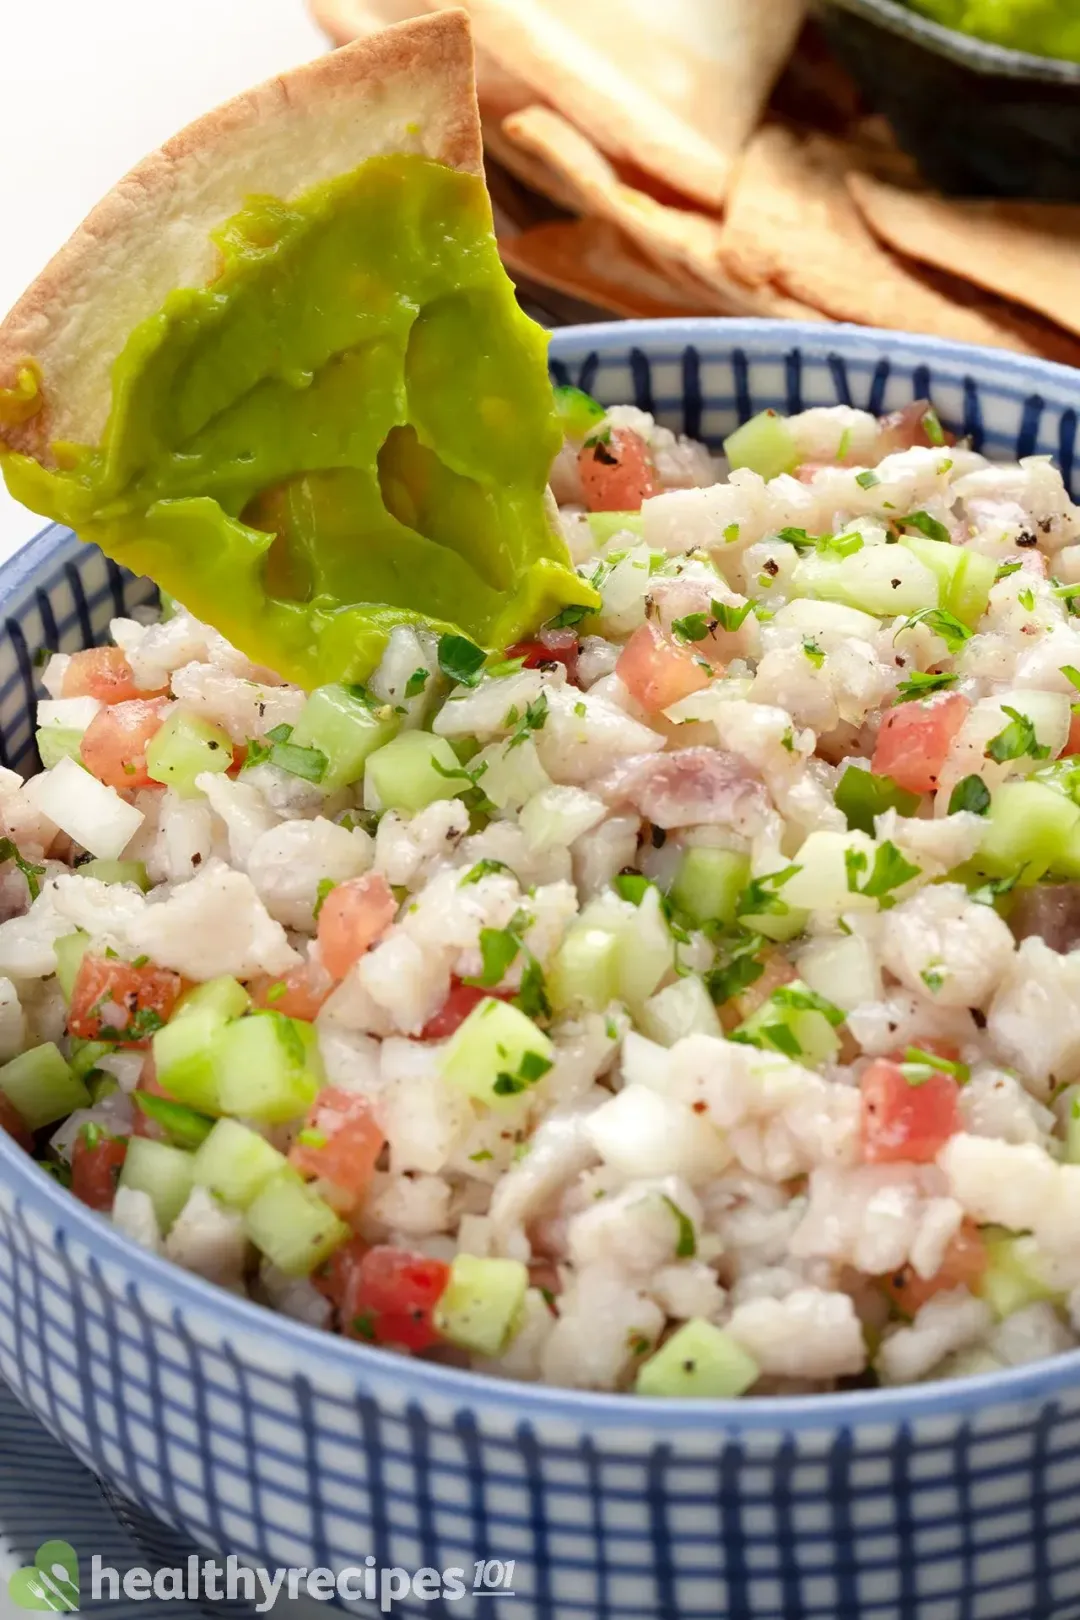 is ceviche safe to eat